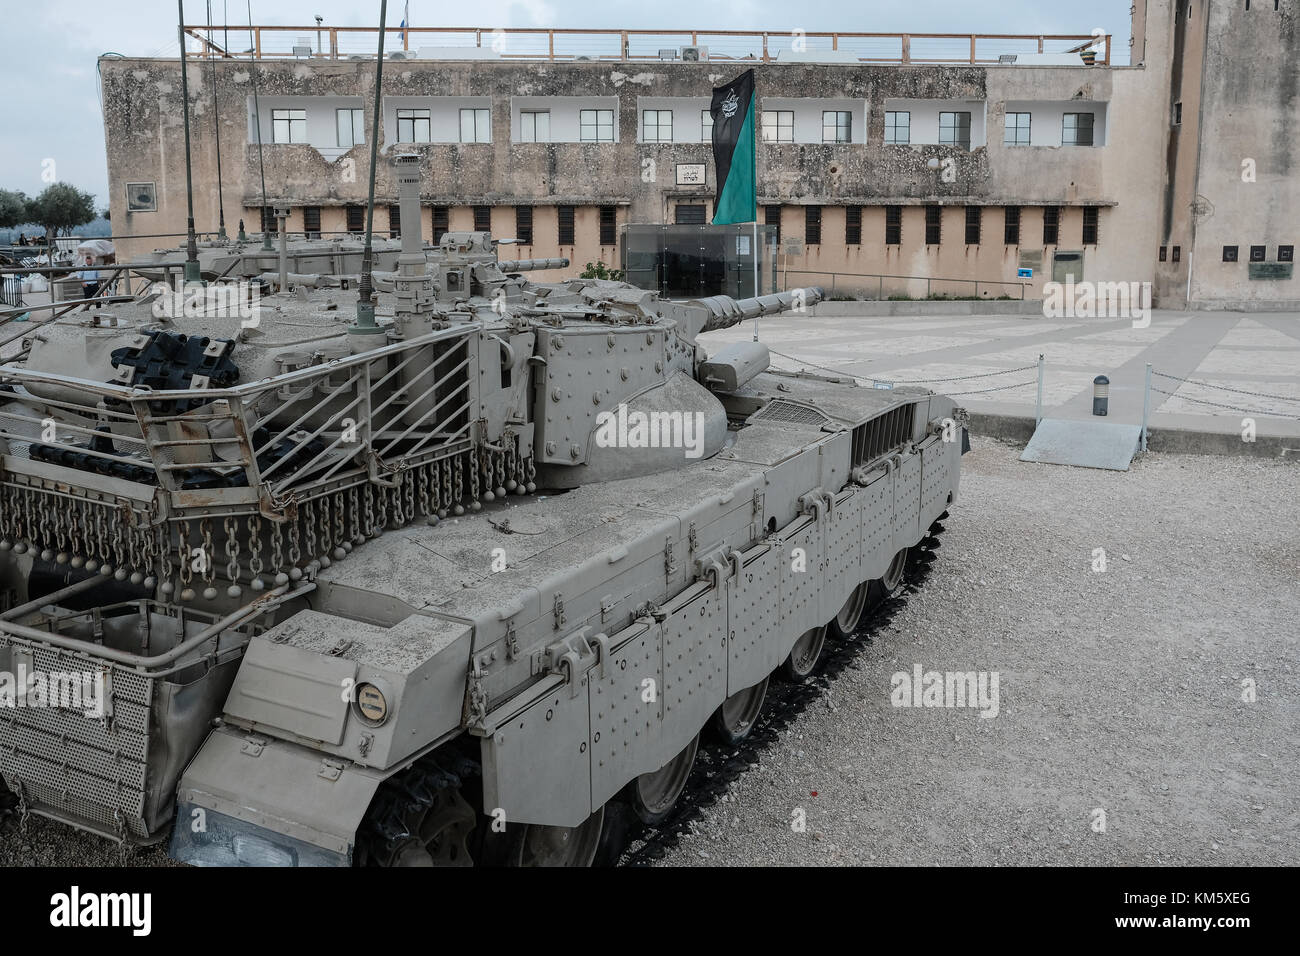 Latrun, Israel. 5th Dec, 2017. Tanks on display as 13 female IDF soldiers graduate tank crew training at a ceremony at Yad LaShiryon, the Armored Corps Memorial Site at Latrun. These are the first women to serve in the Armored Corps as part of a pilot program. Having concluded tank training on Merkava Mark 3 tanks, female soldiers are destined to serve in the army's 80th Division, responsible for the southern Negev and Arava deserts, securing Israel's borders with Egypt and Jordan. Credit: Nir Alon/Alamy Live News Stock Photo